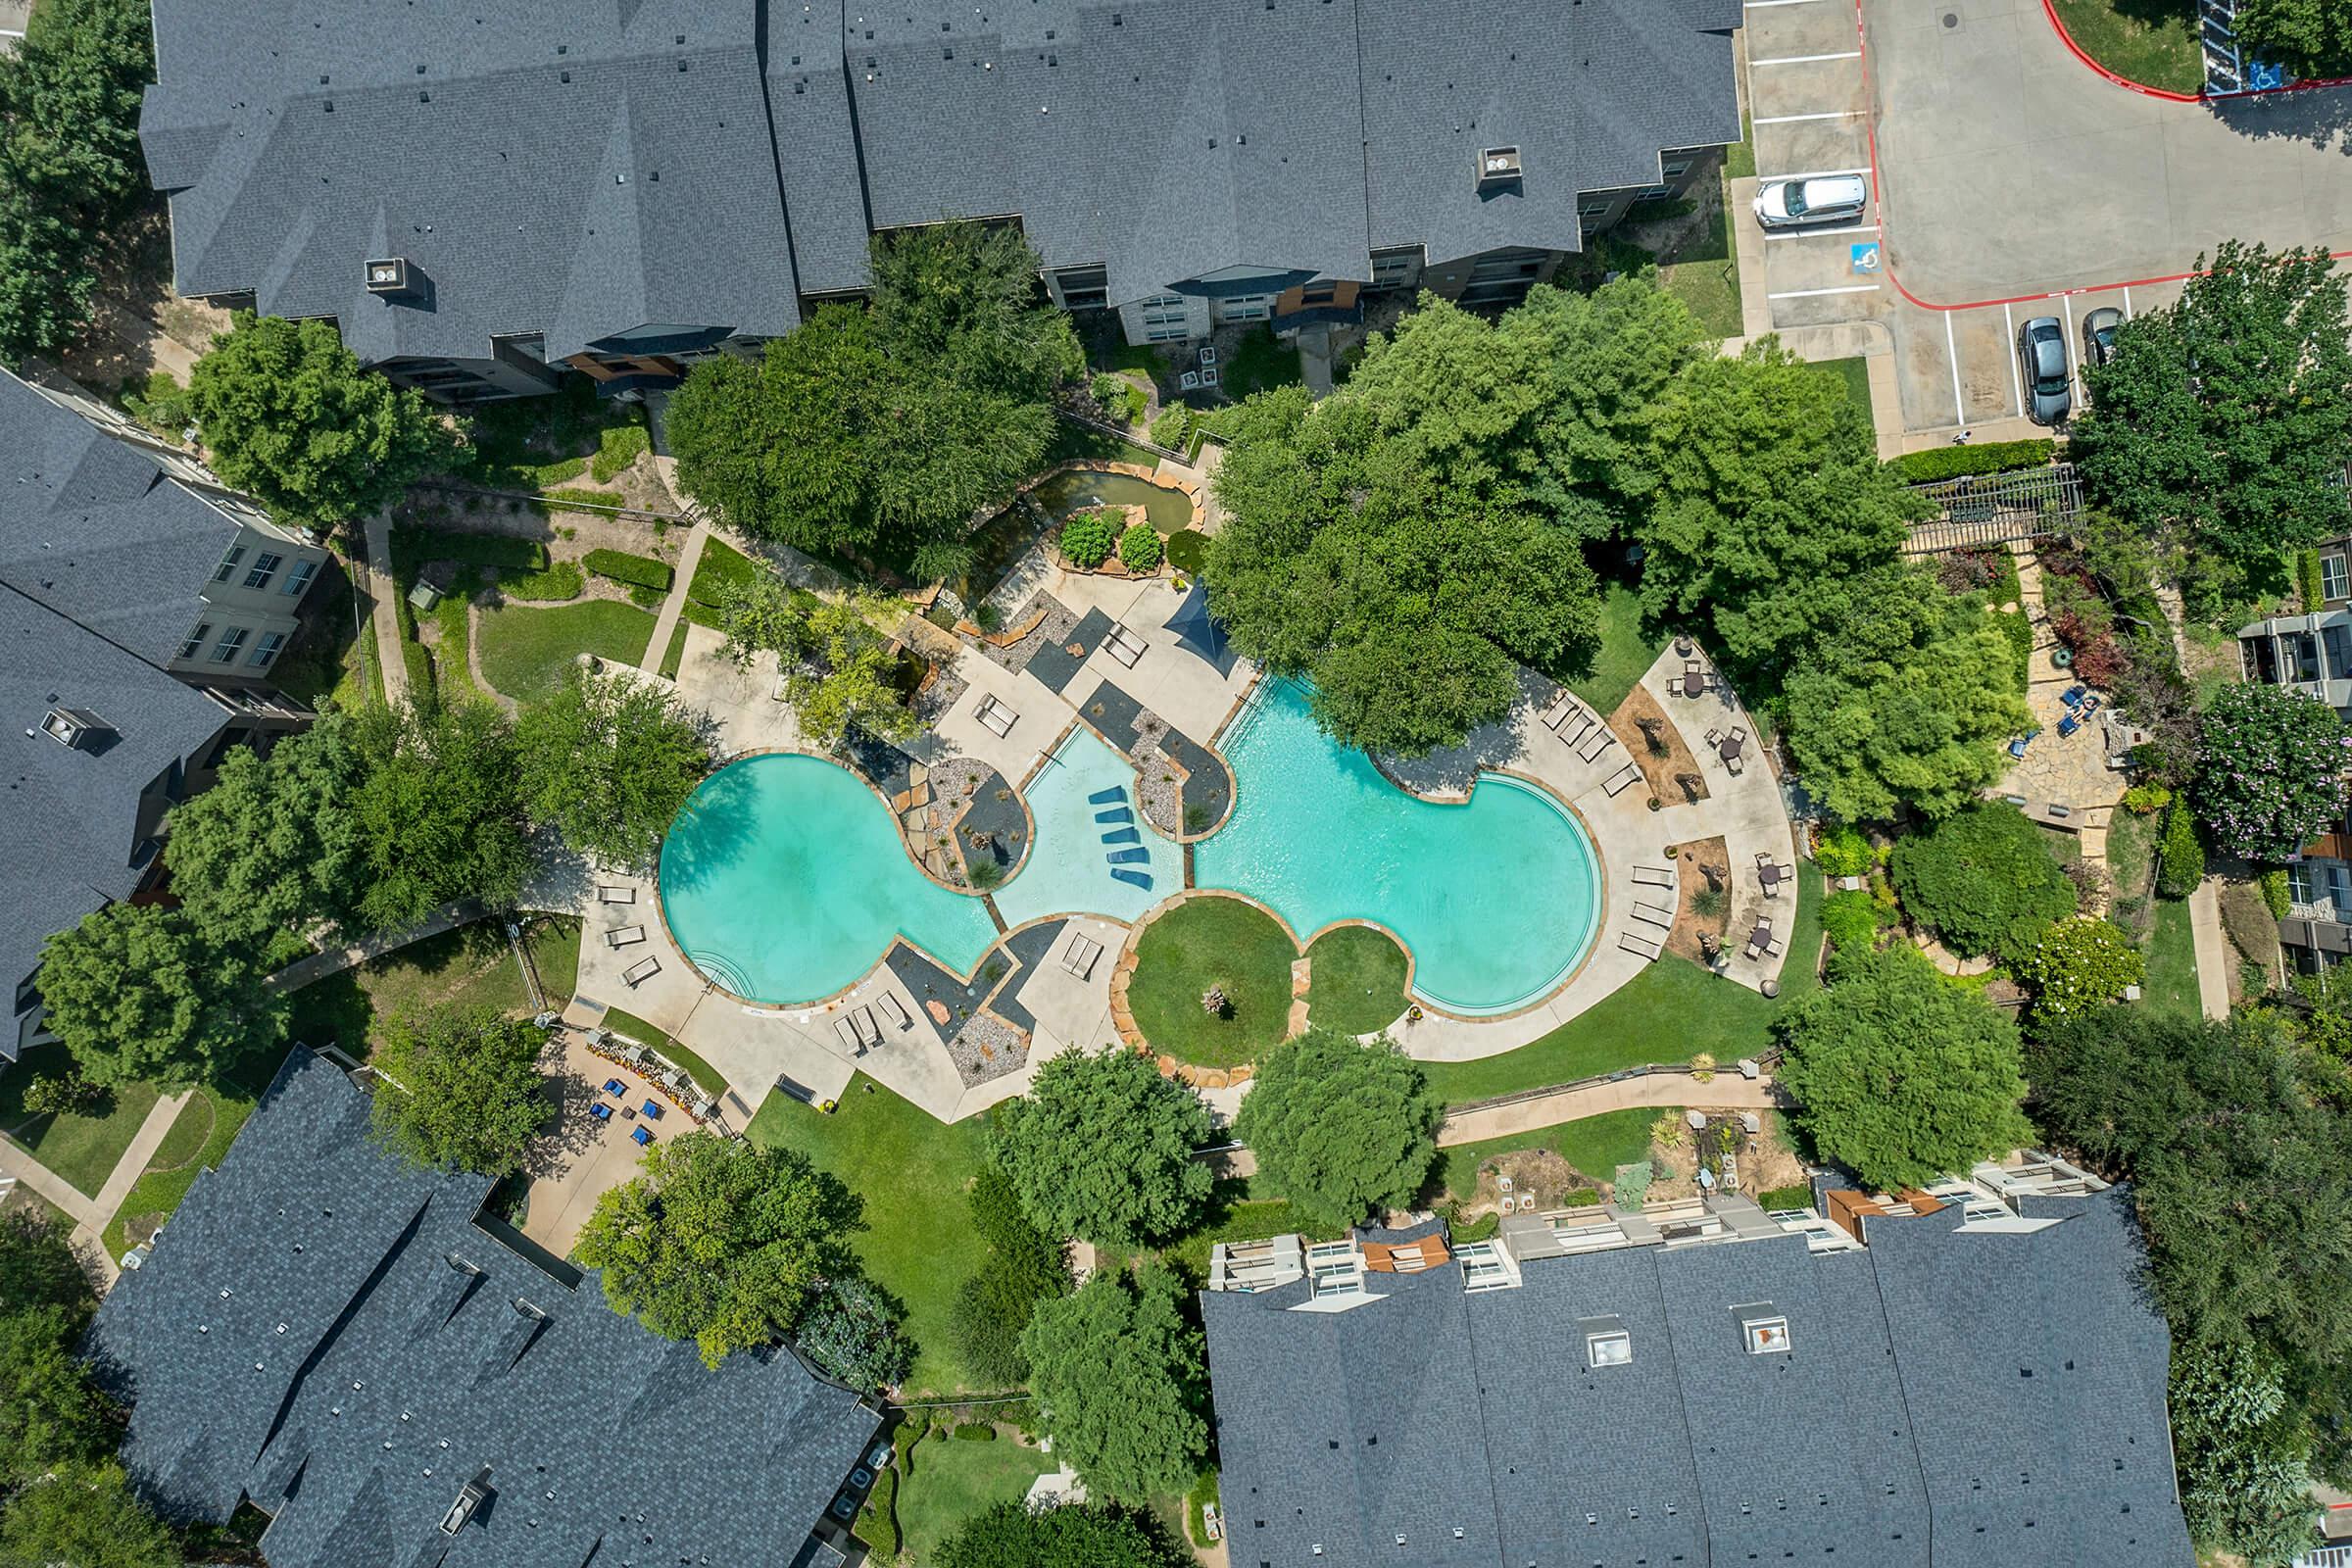 Lake Pointe community pool and community buildings from above